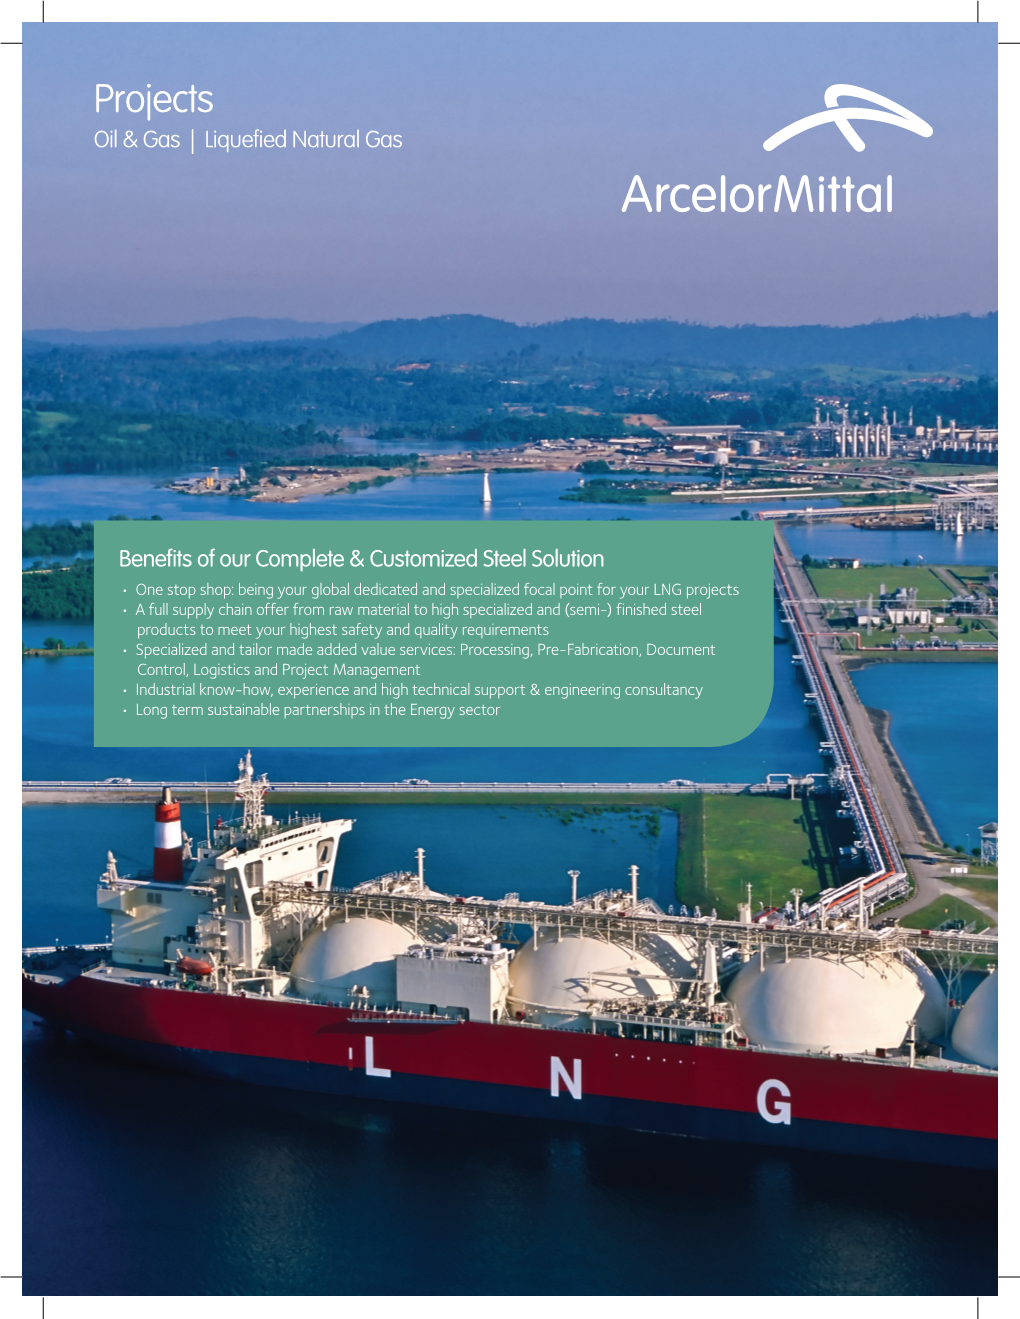 Projects Oil & Gas | Liquefied Natural Gas